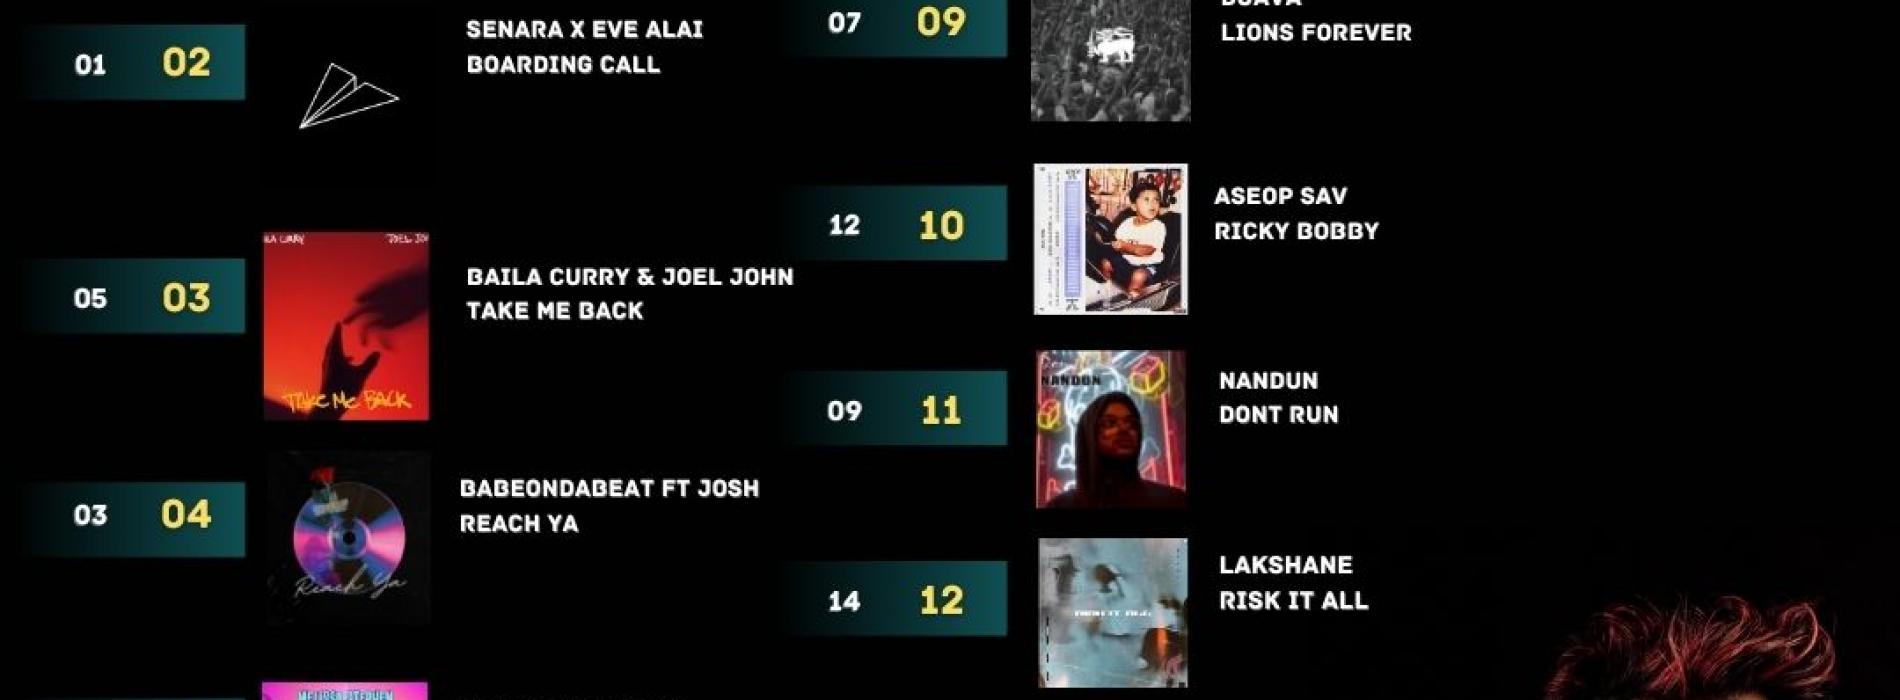 News : Dilan Jay Hits Number 1 For The First Time!